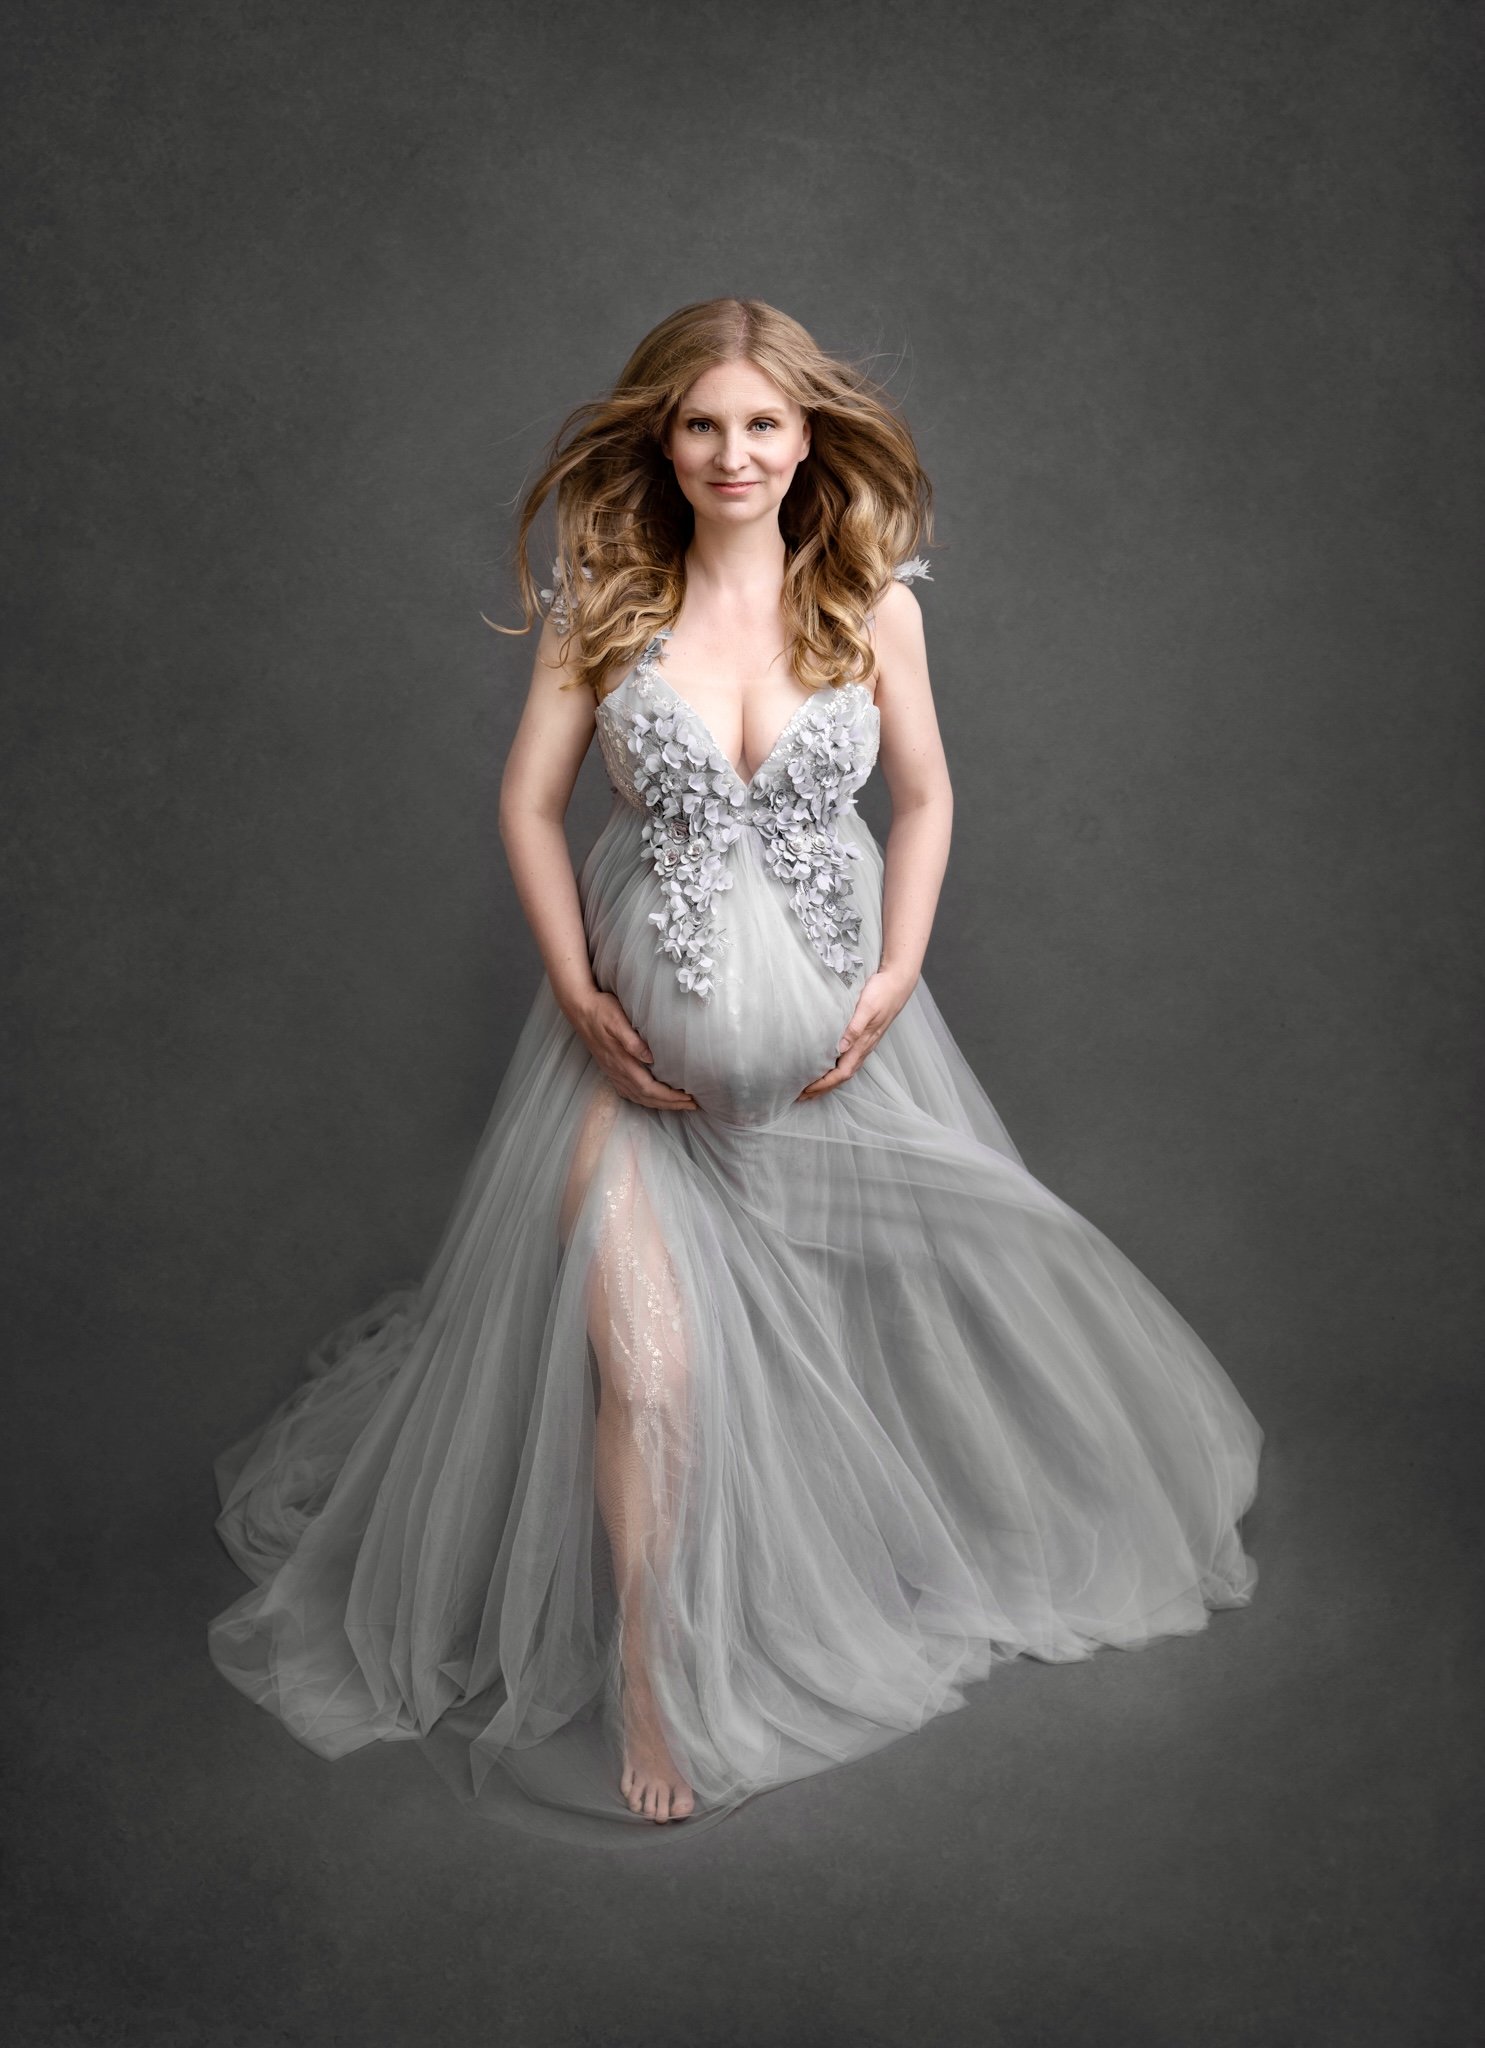 Show off your bump in gorgeous photos 